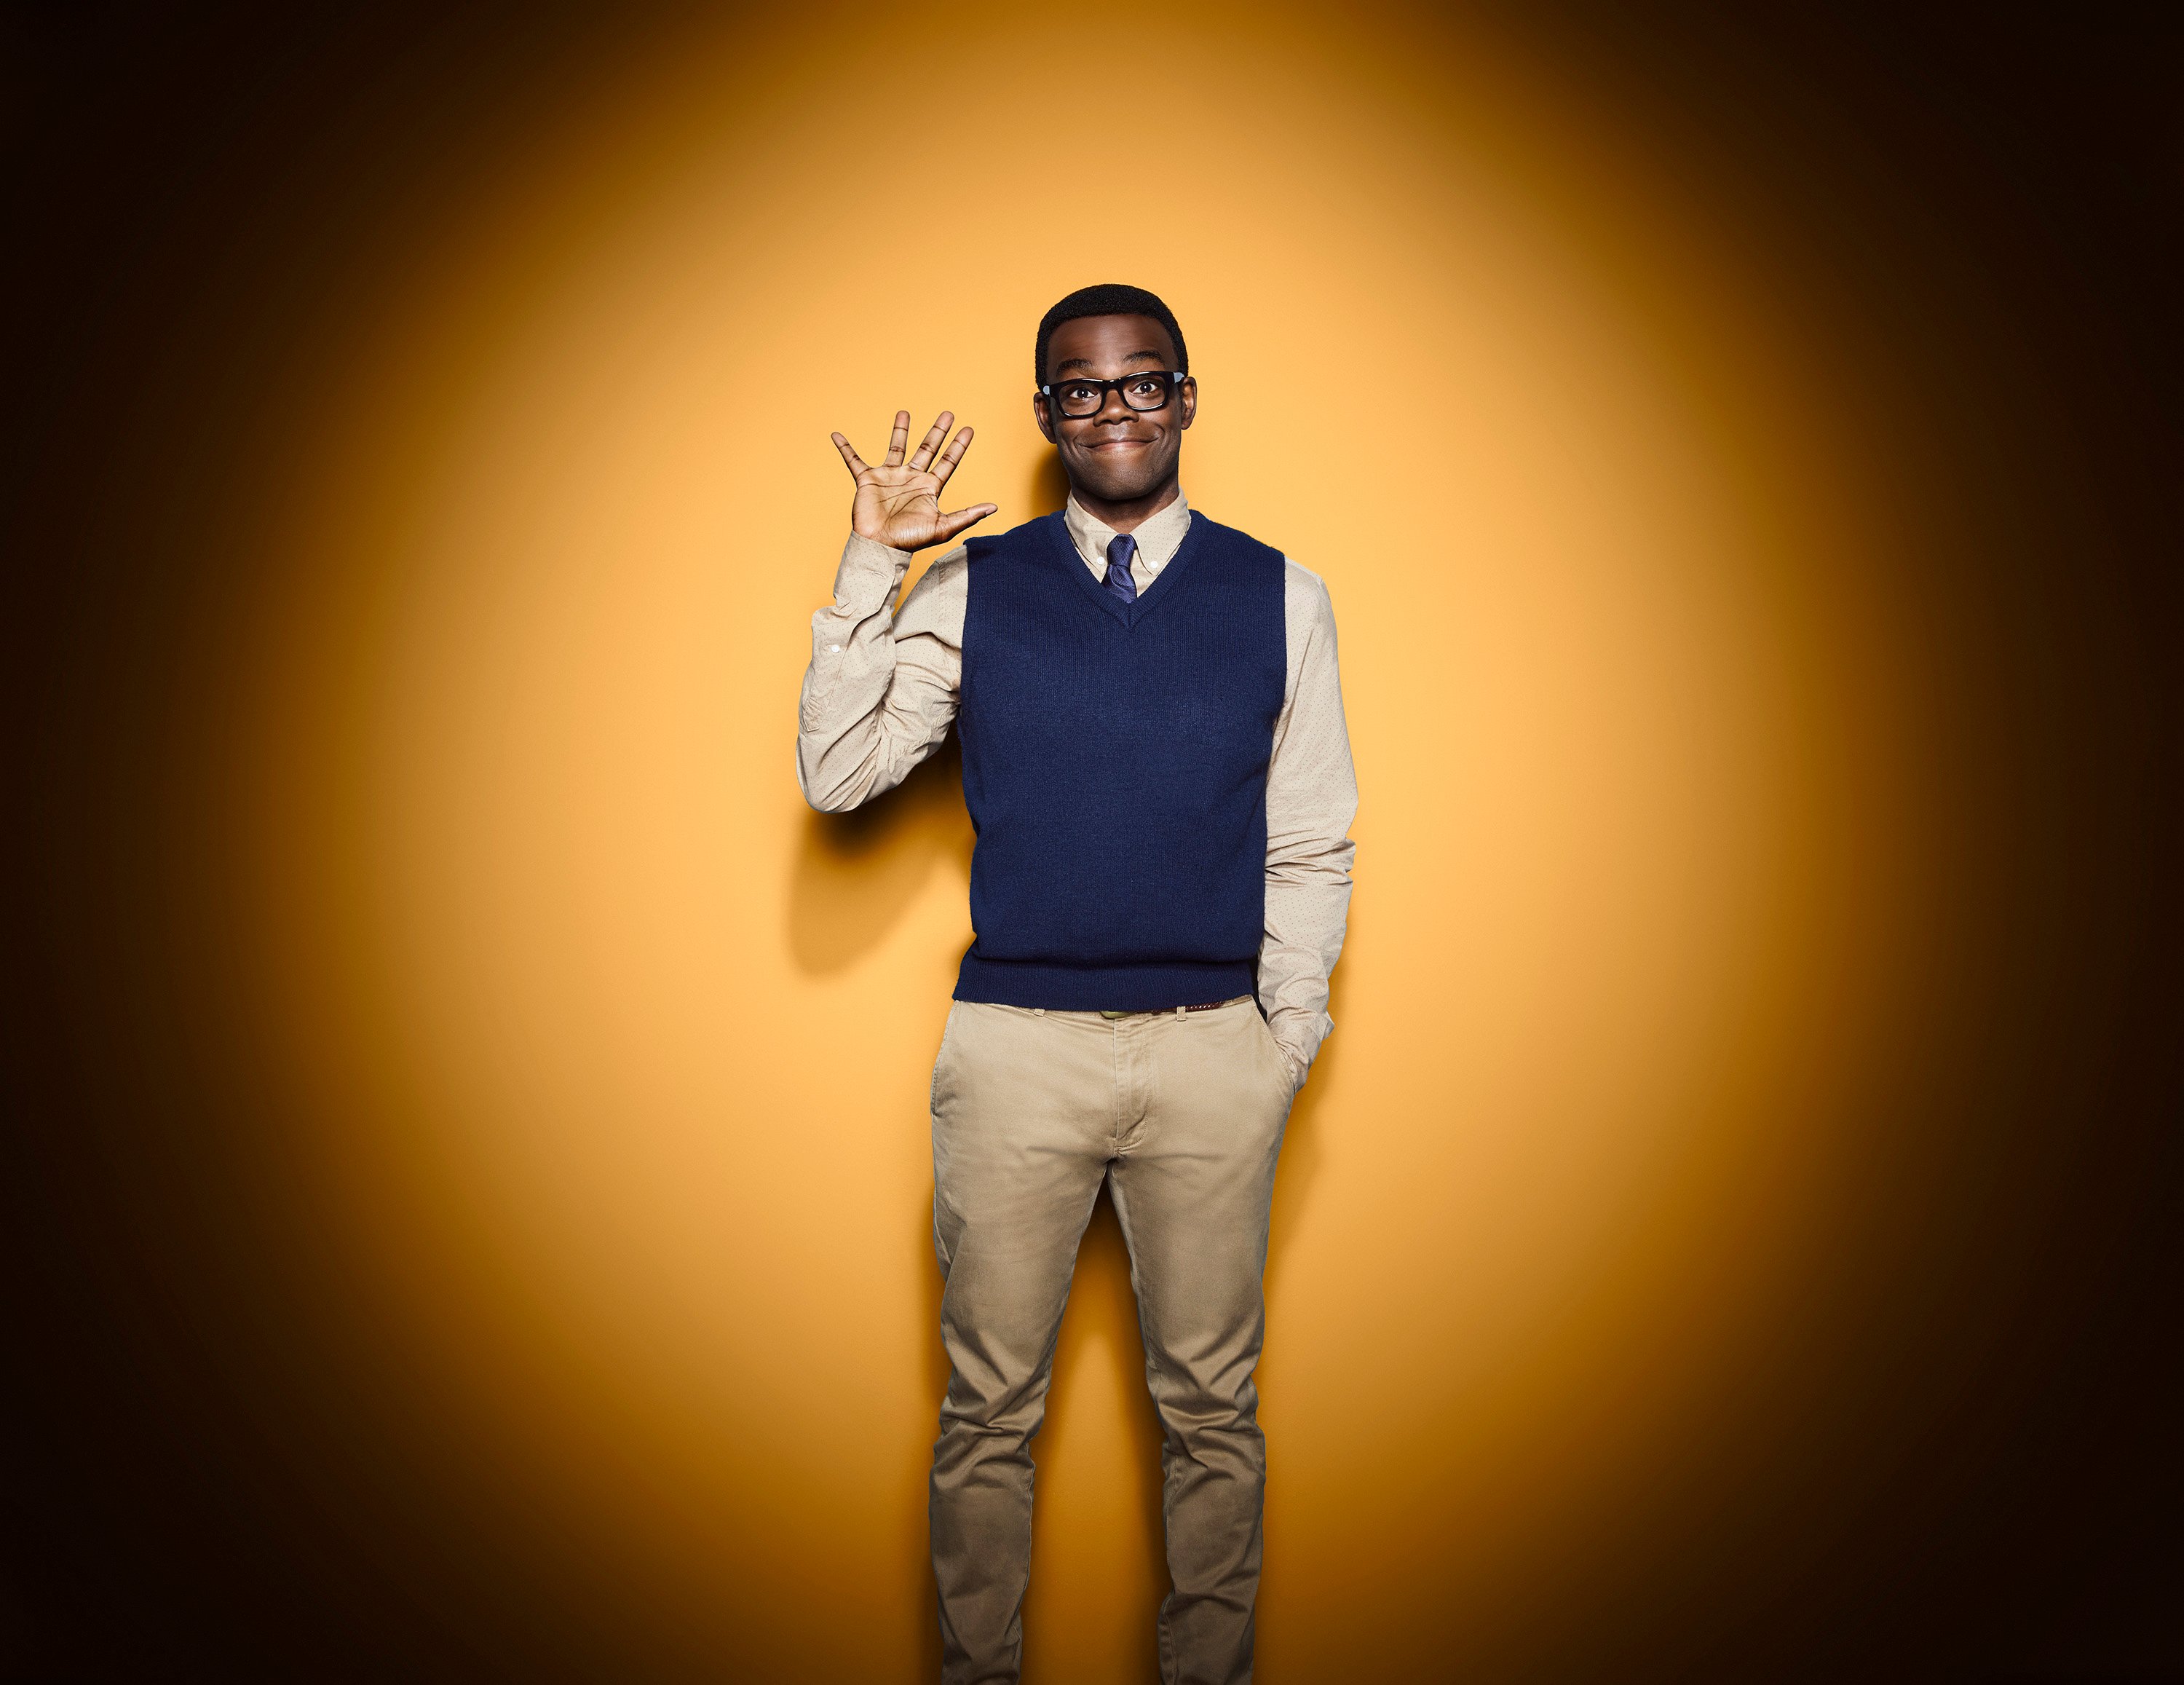 William Jackson Harper as Chidi in 'The Good Place'